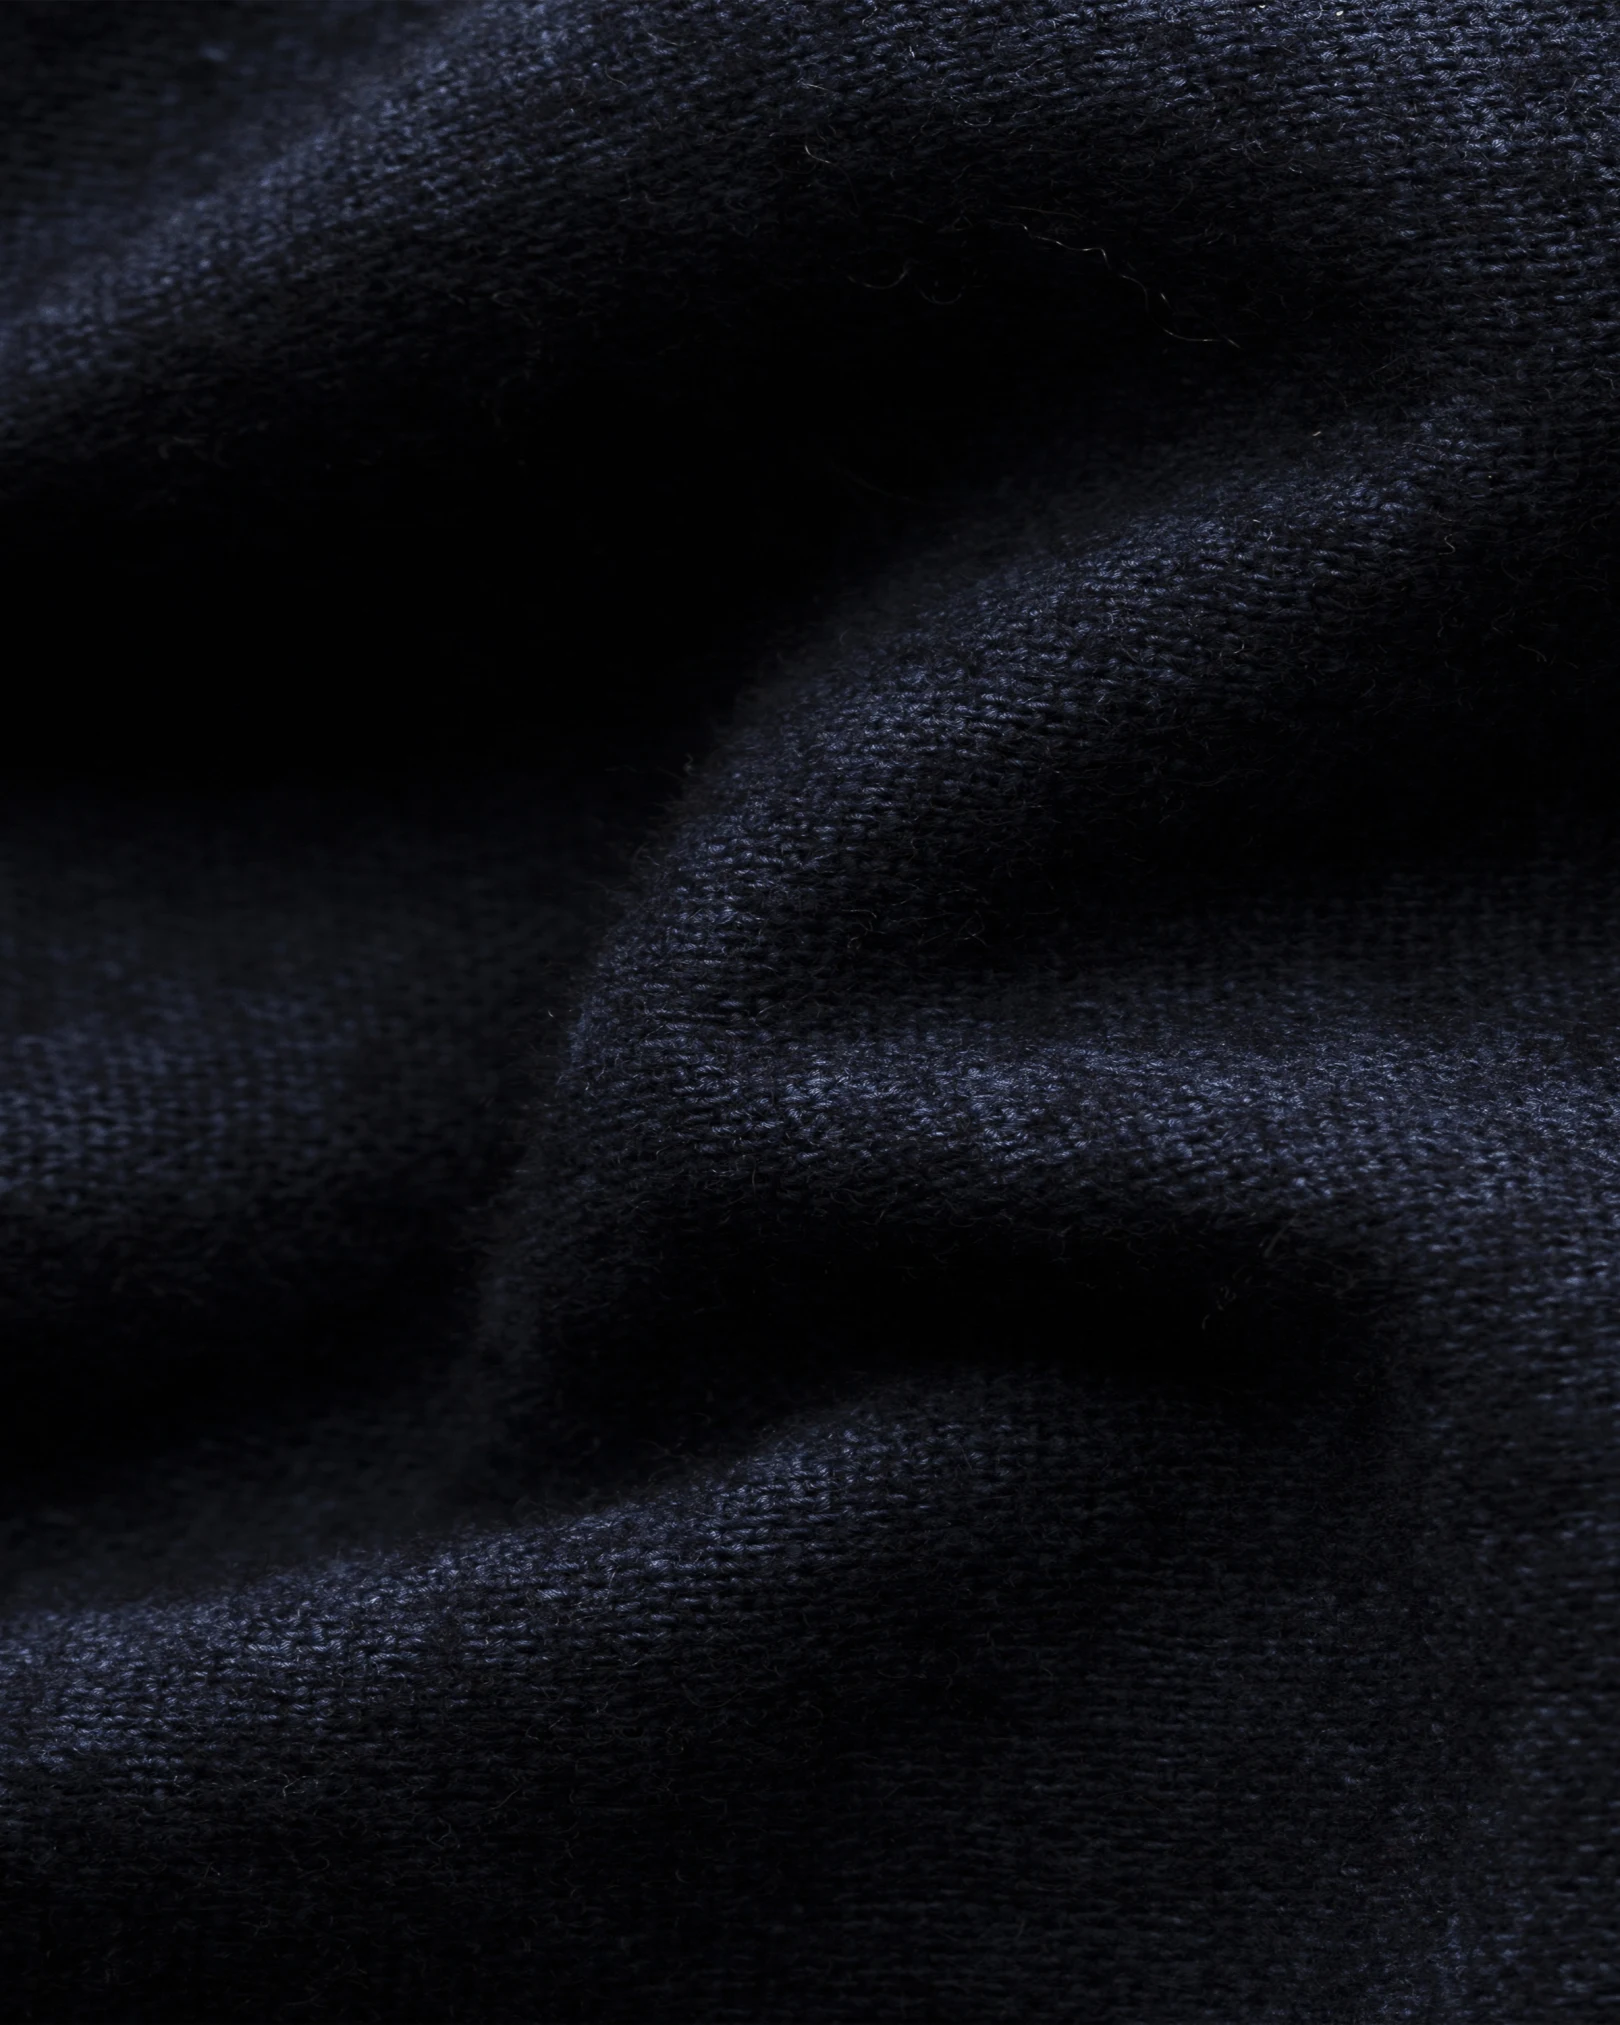 Cotton-Wool-Cashmere fabric